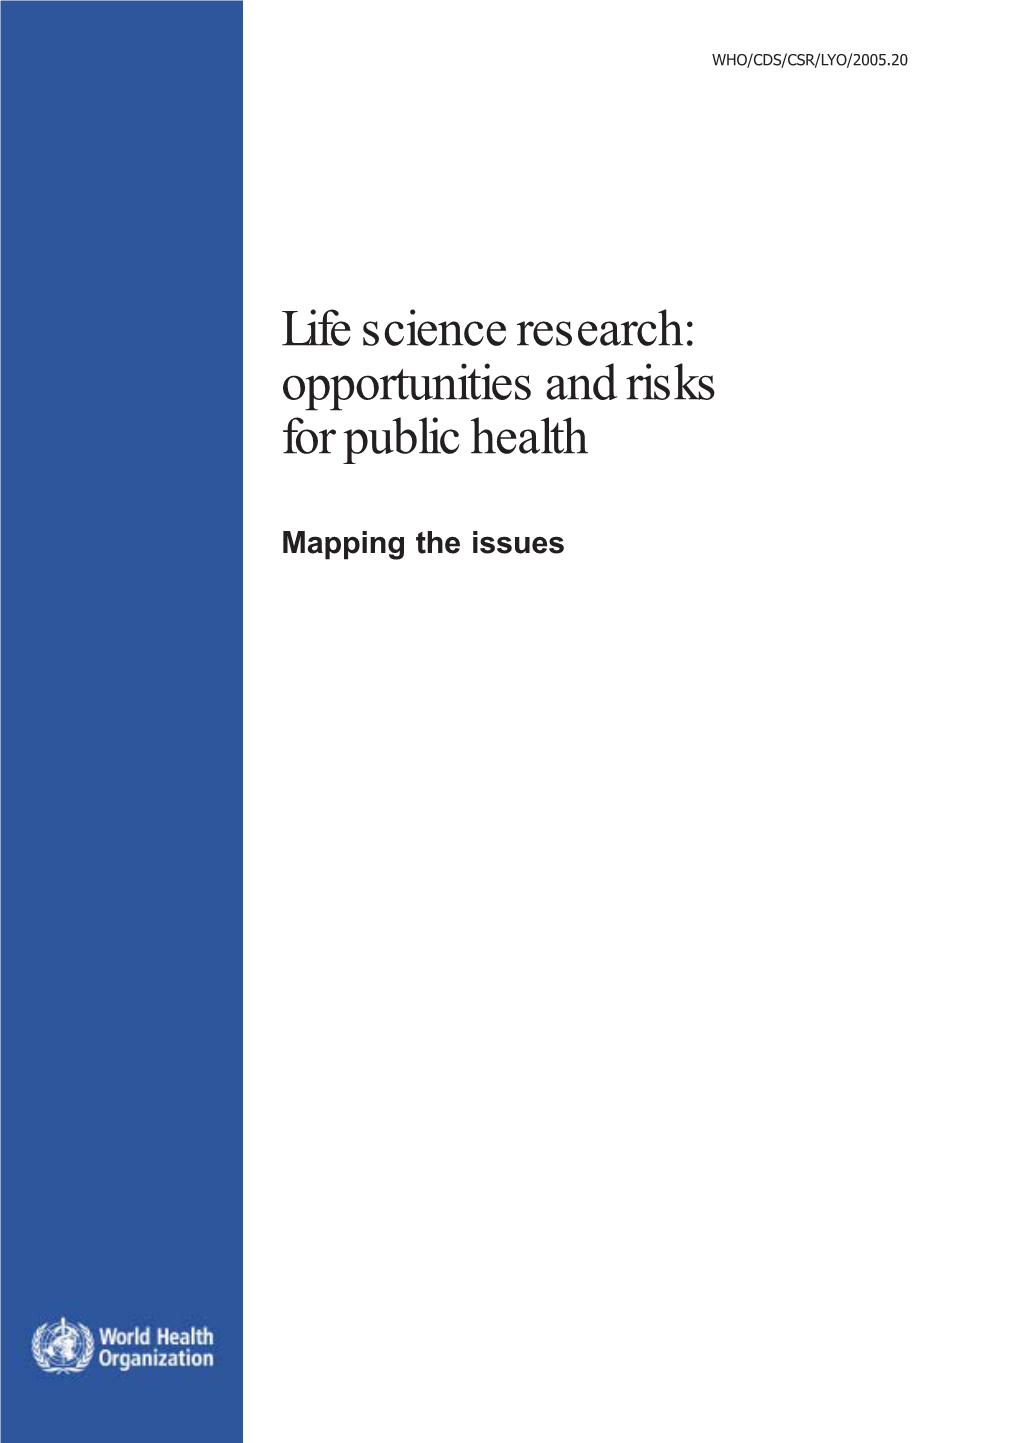 Life Science Research: Opportunities and Risks for Public Health